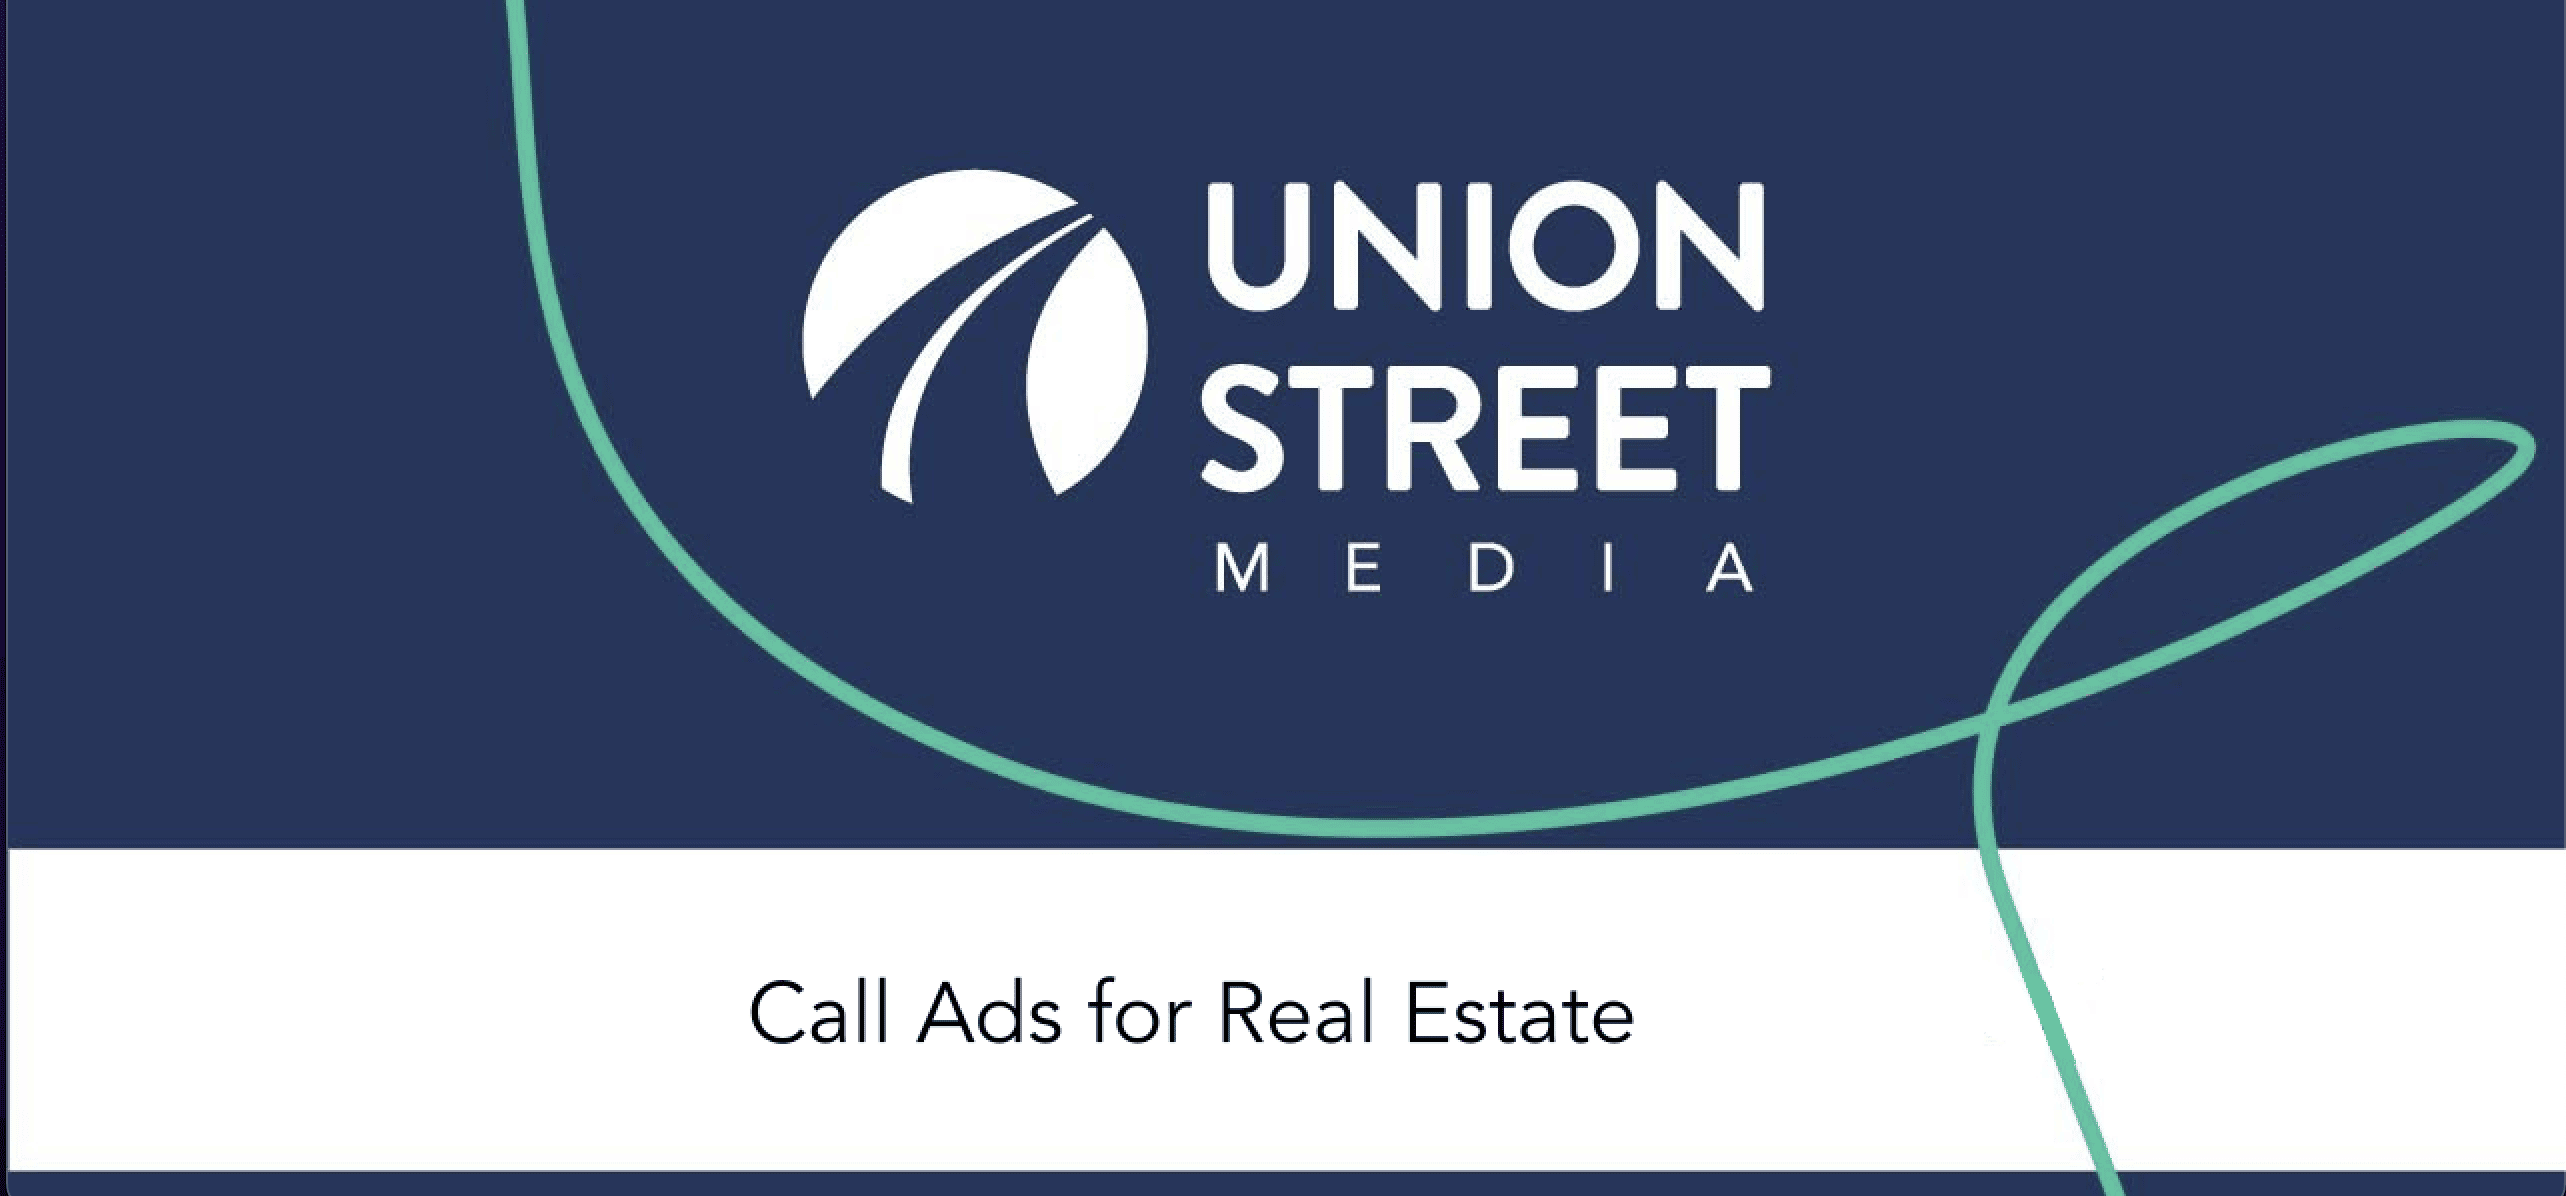 call ads for real estate with union street media